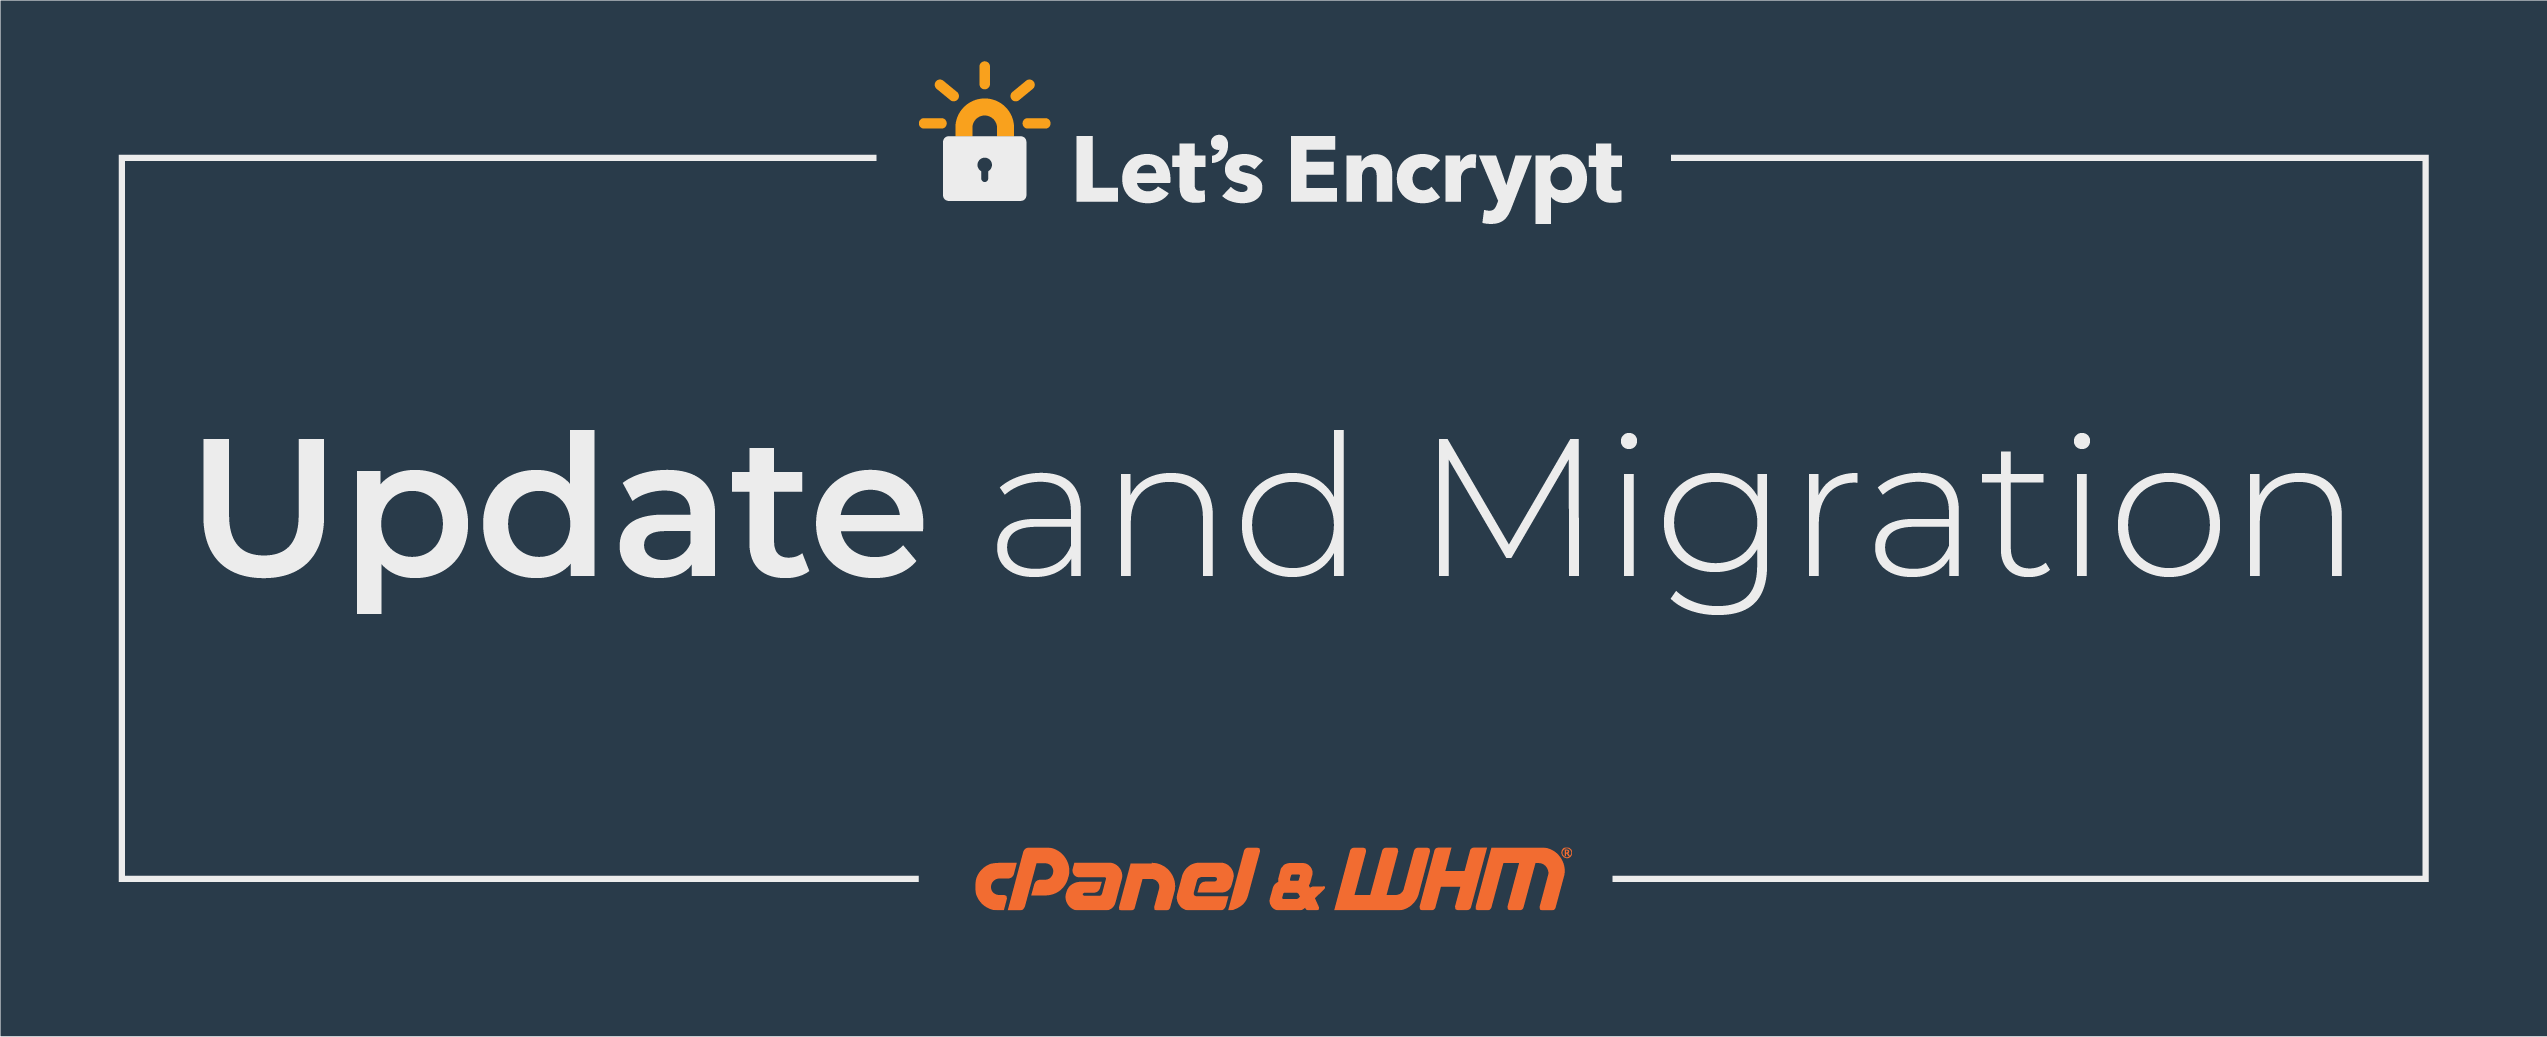 Upcoming Changes to Let's Encrypt Plugin